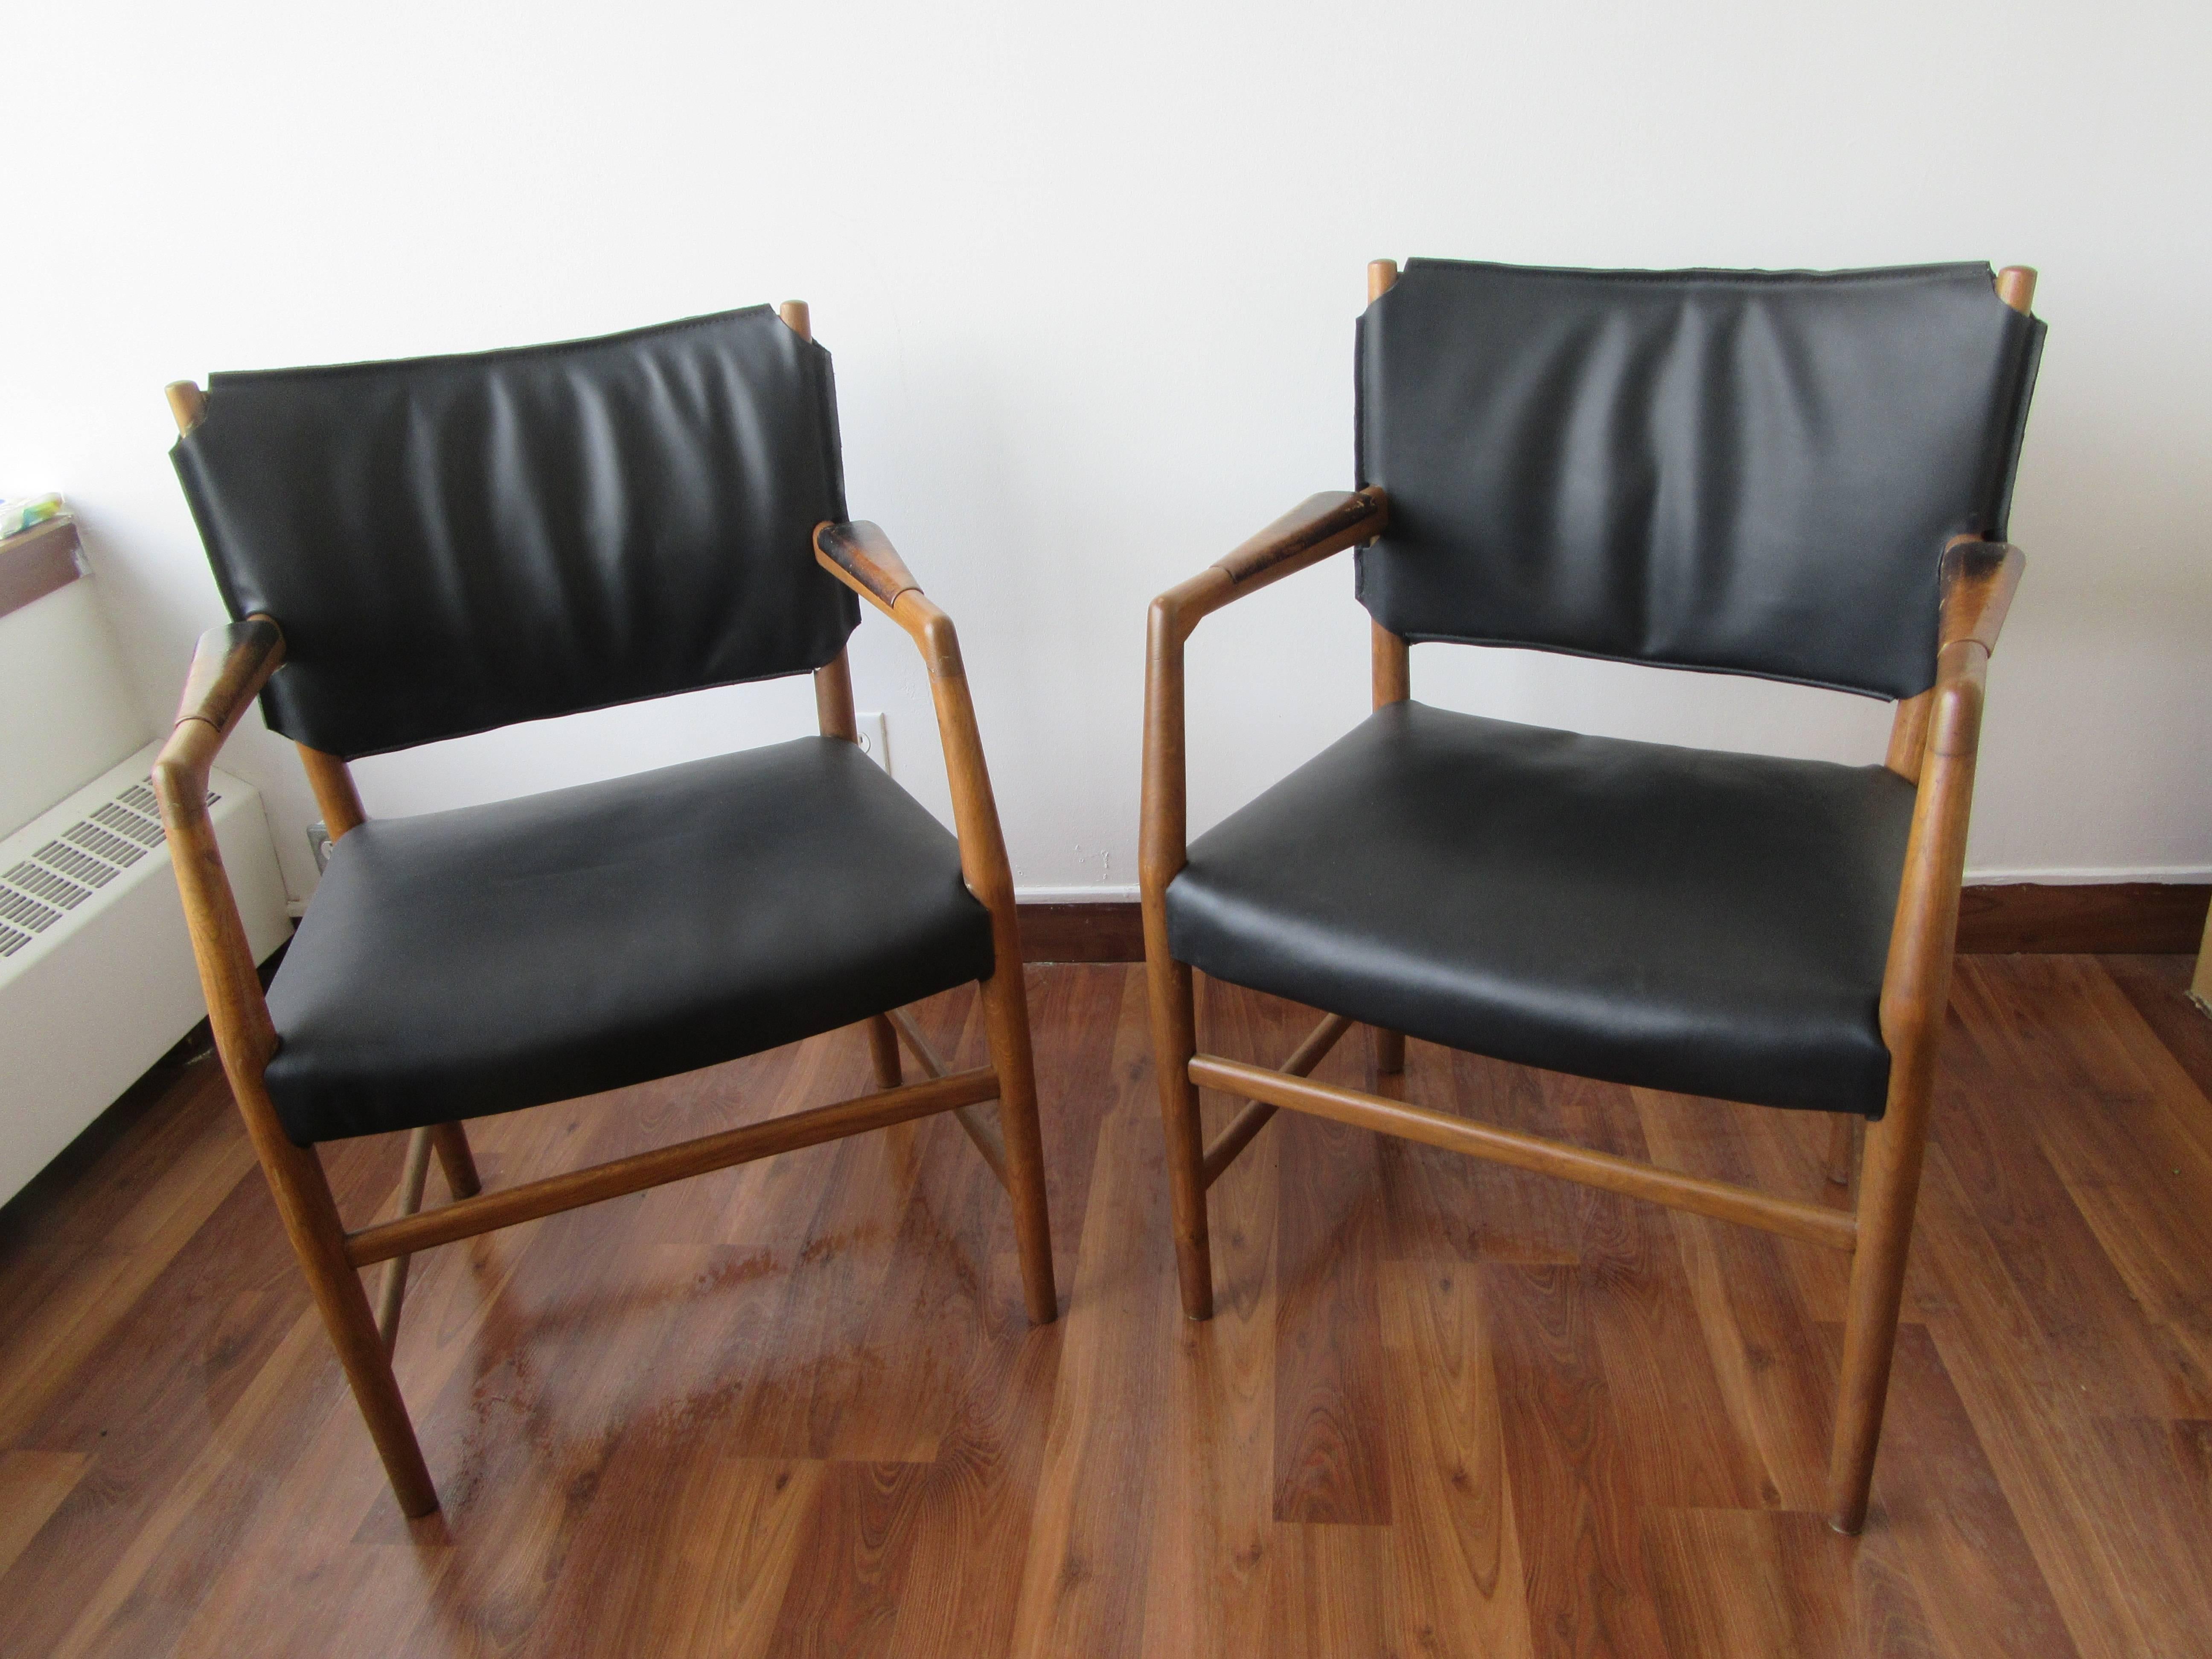 Mid-20th Century Pair of Aarhus City Hall Chairs by Hans Wegner Reupholstered in Black Leather For Sale